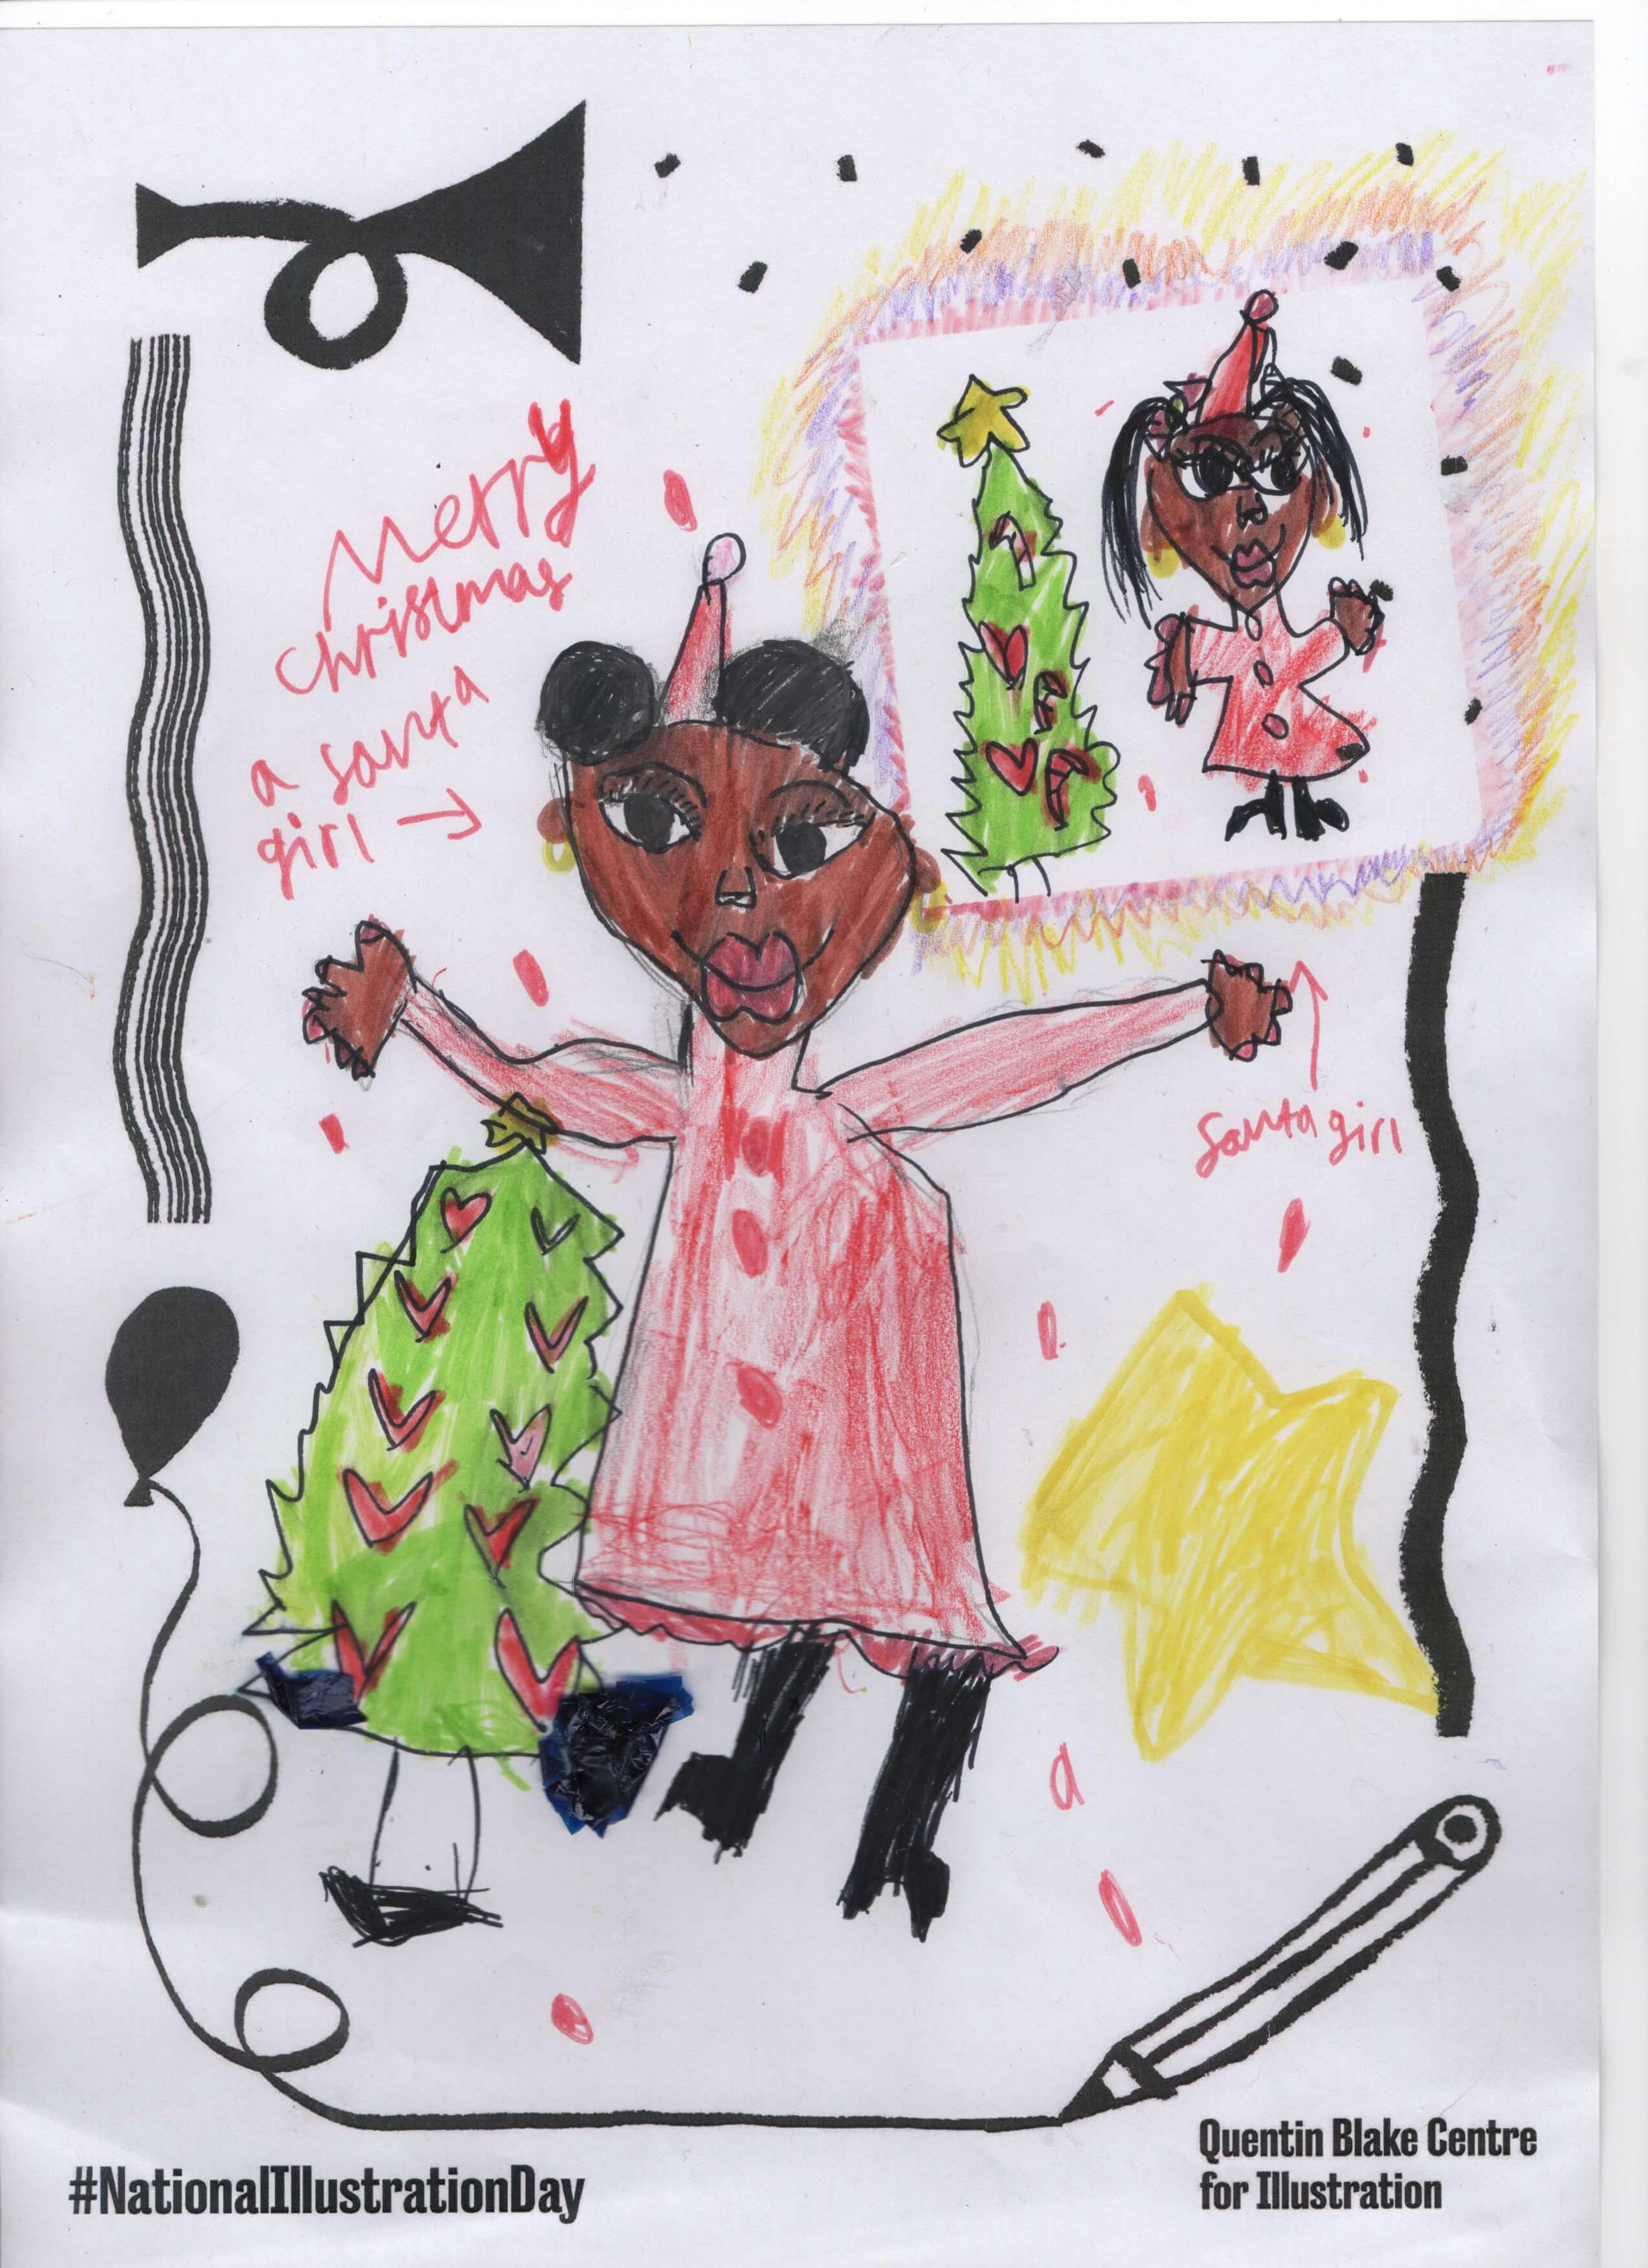 Artwork of a child with space buns dressed in pink stood next to a Christmas tree. The picture includes a smaller drawing depicting the same, but the second picture shows the child with two ponytails instead.